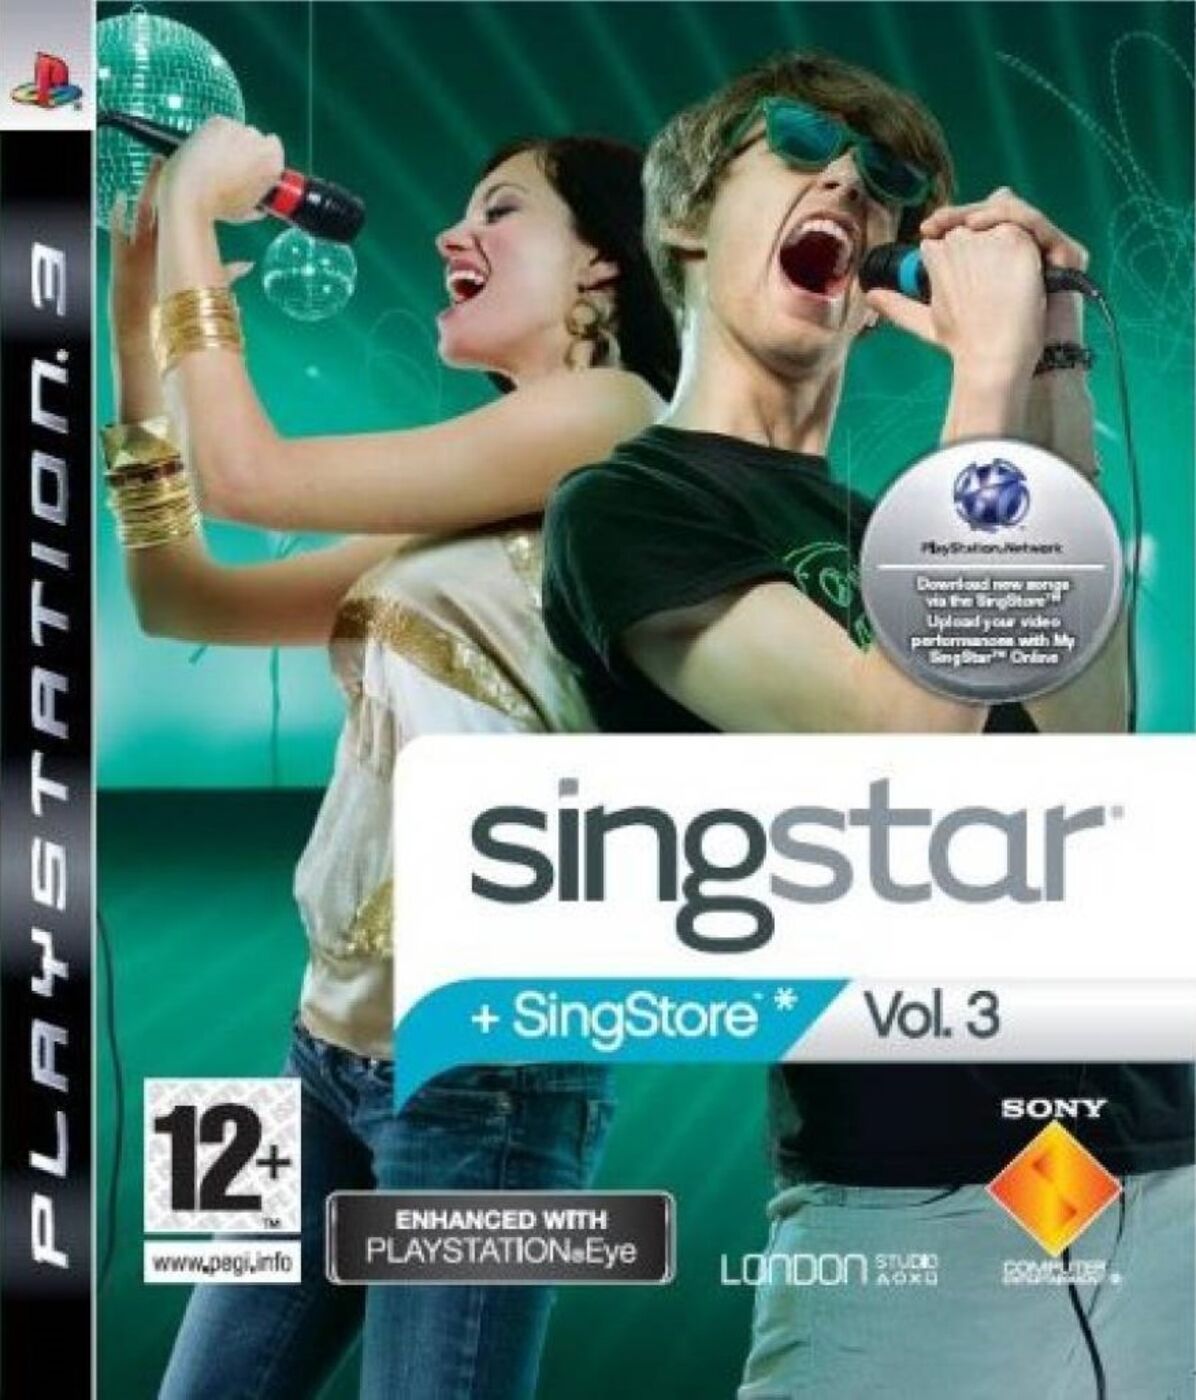 how to get free singstar songs ps3